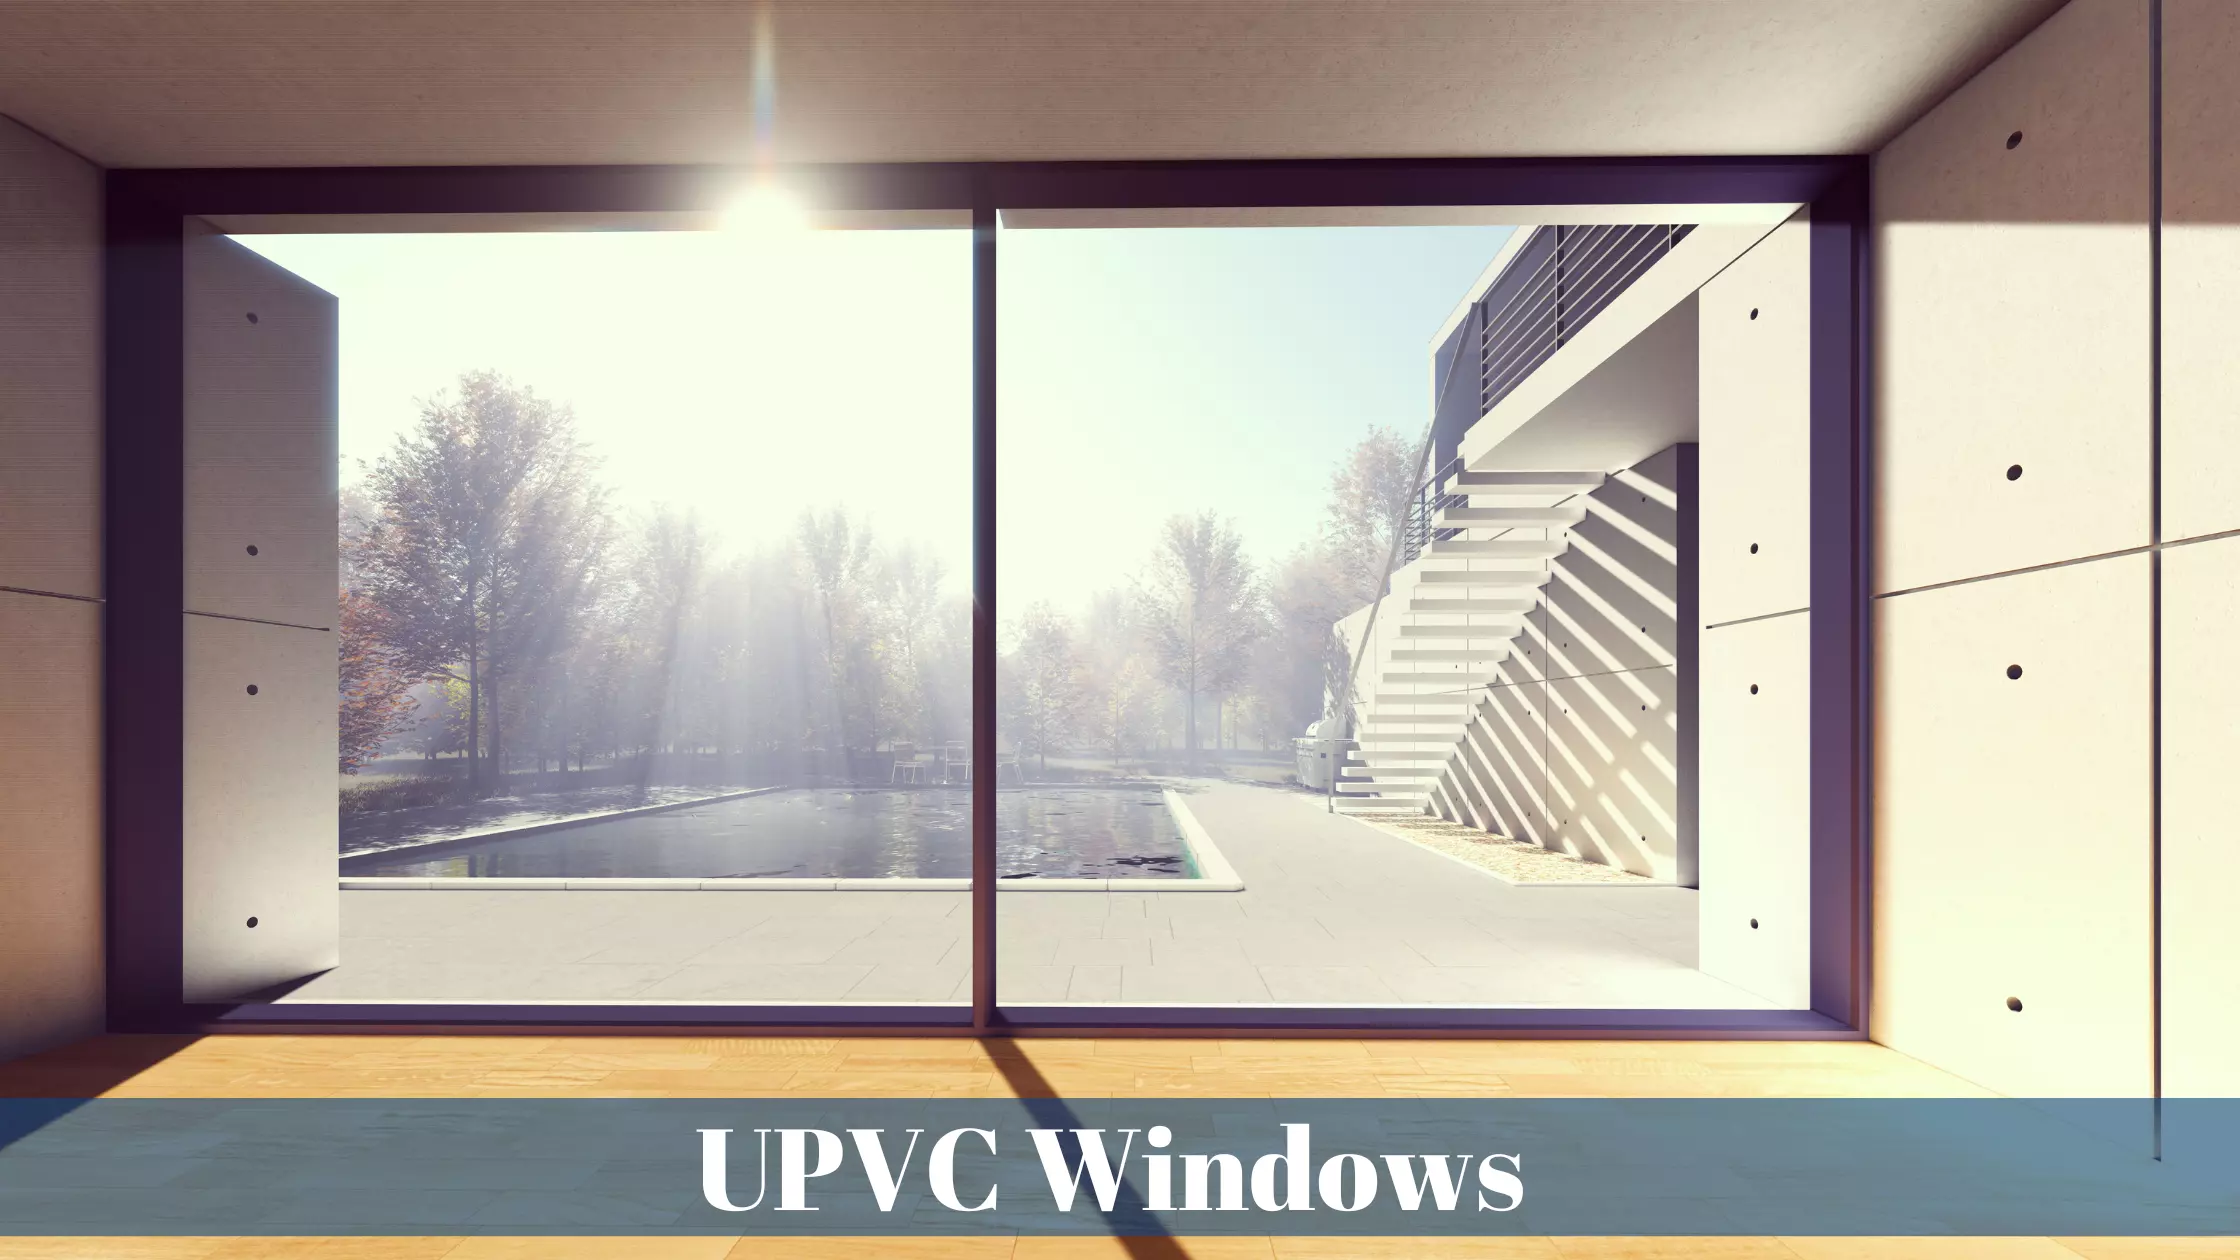 A Complete Guide to UPVC Windows and Doors: Prices, Benefits, Pros & Cons